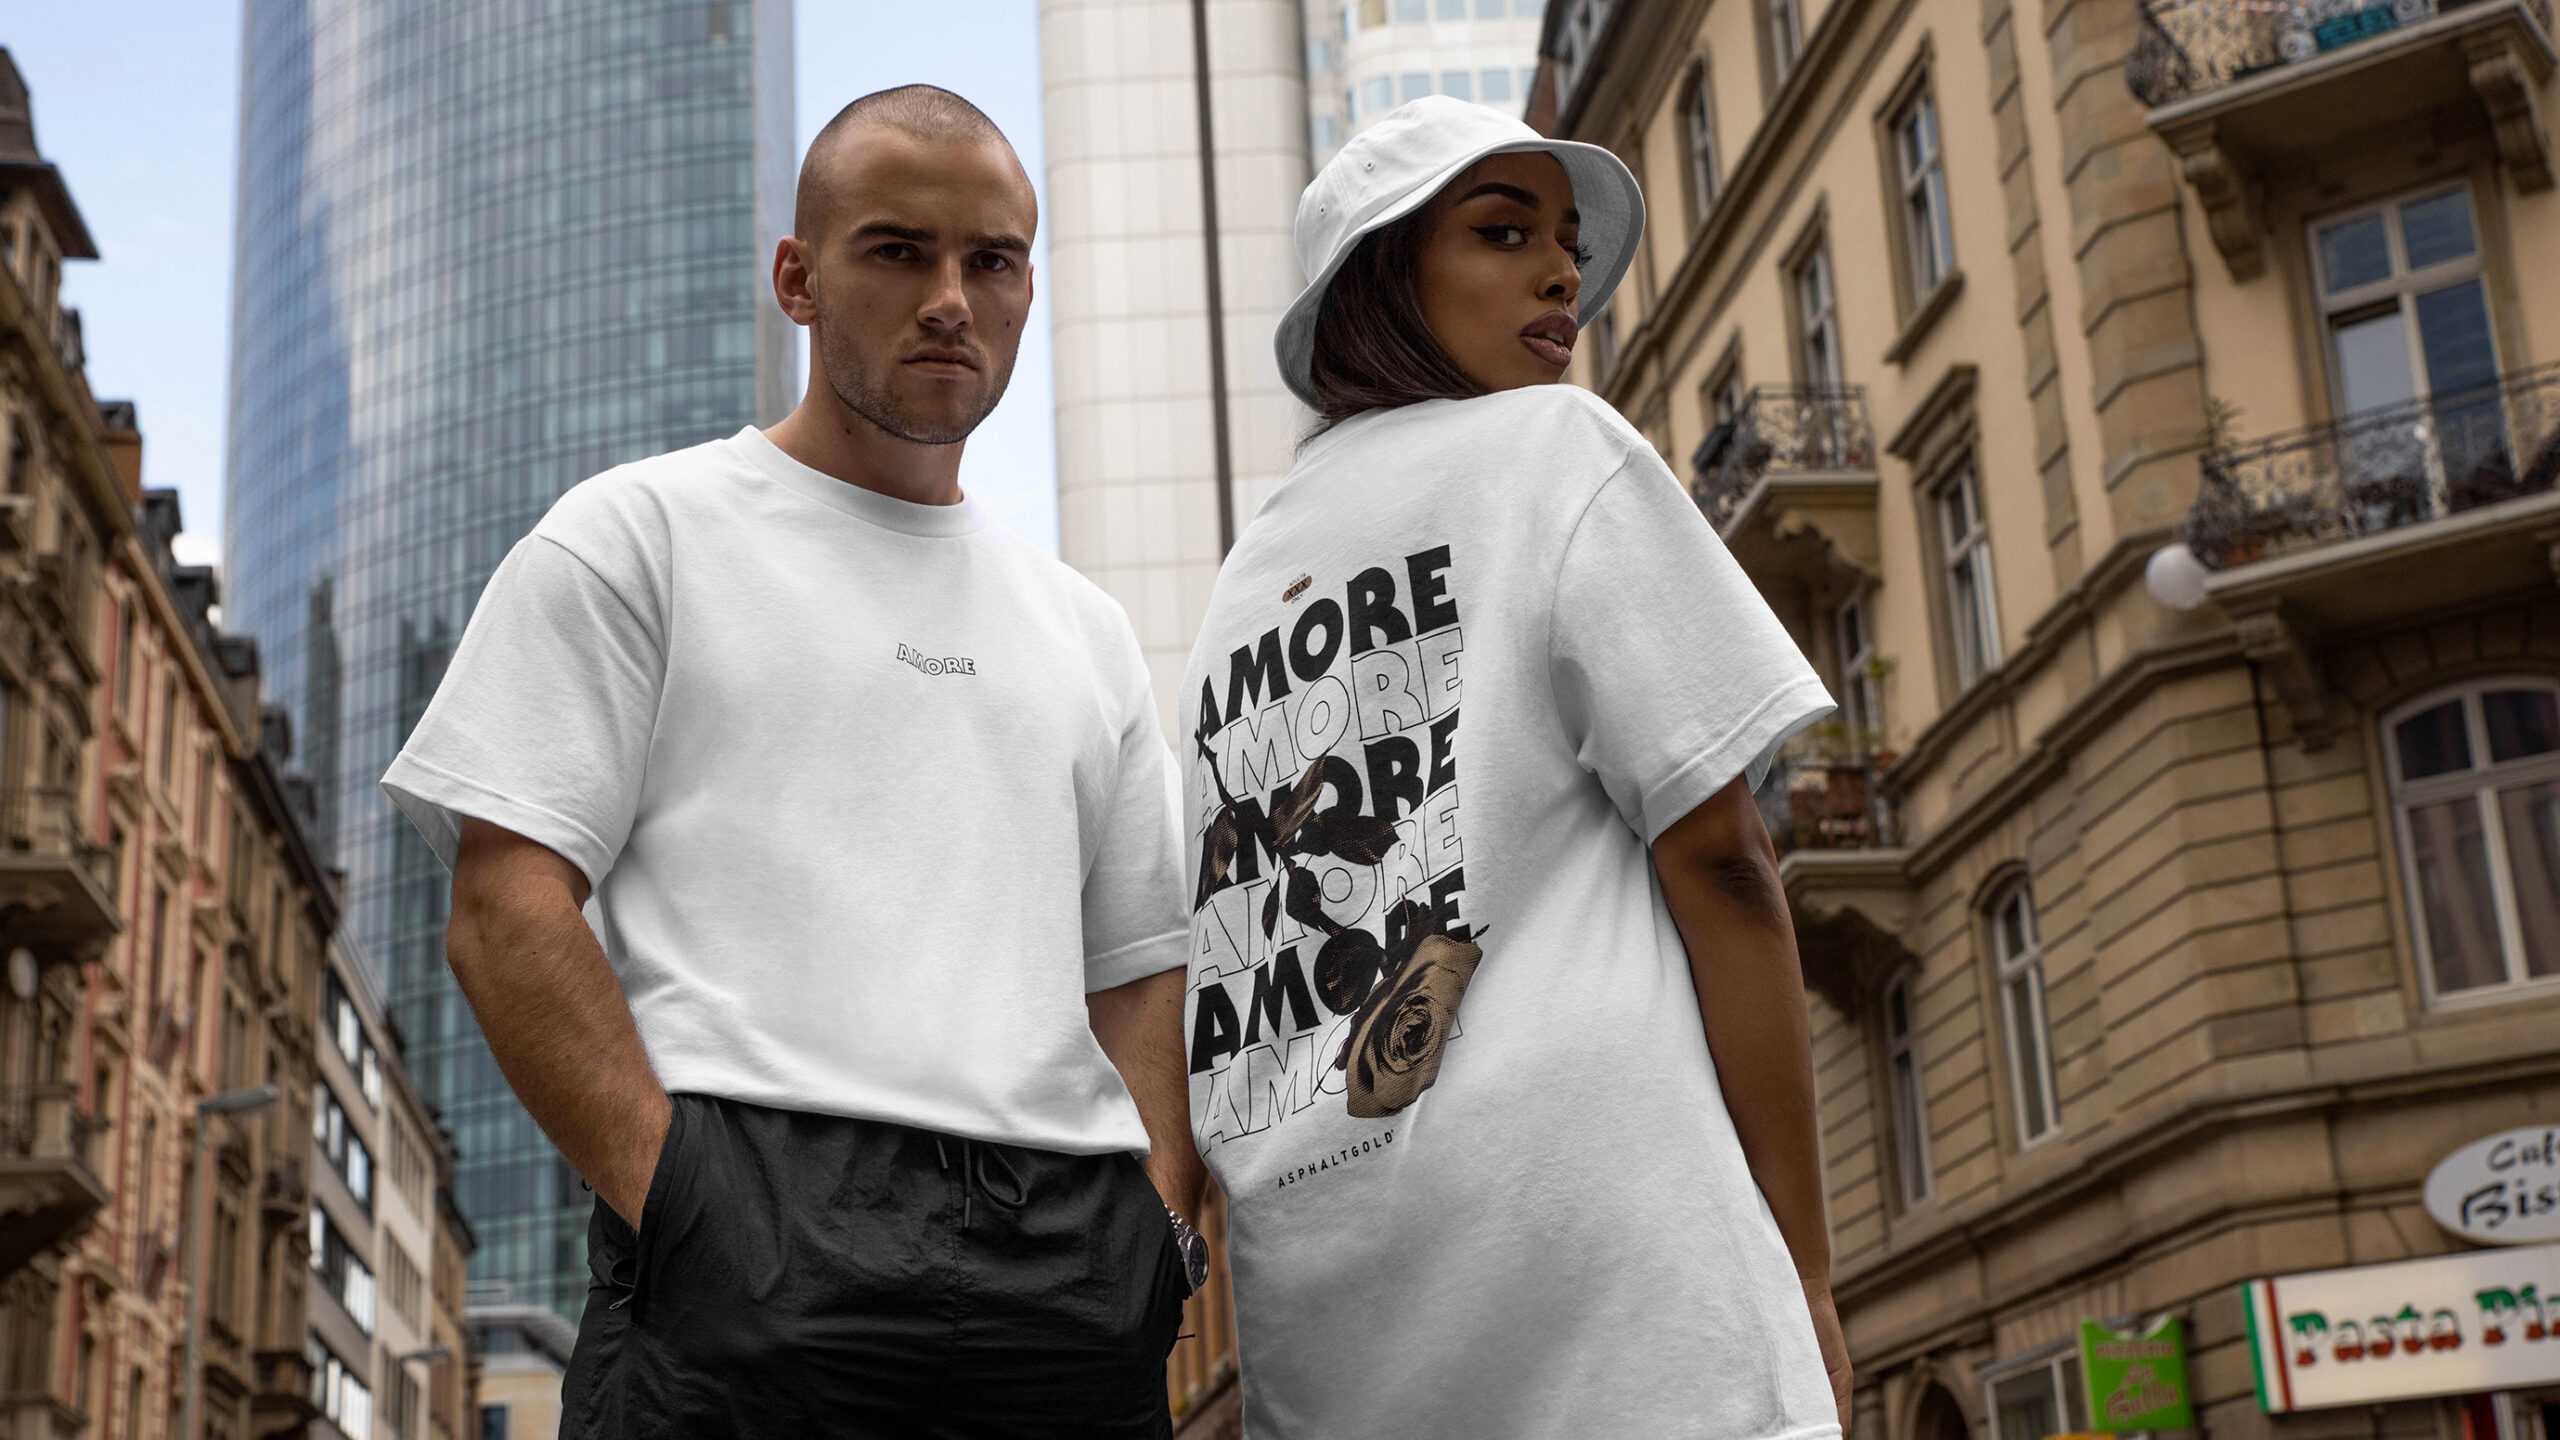 Two models wearing the Amore shirt